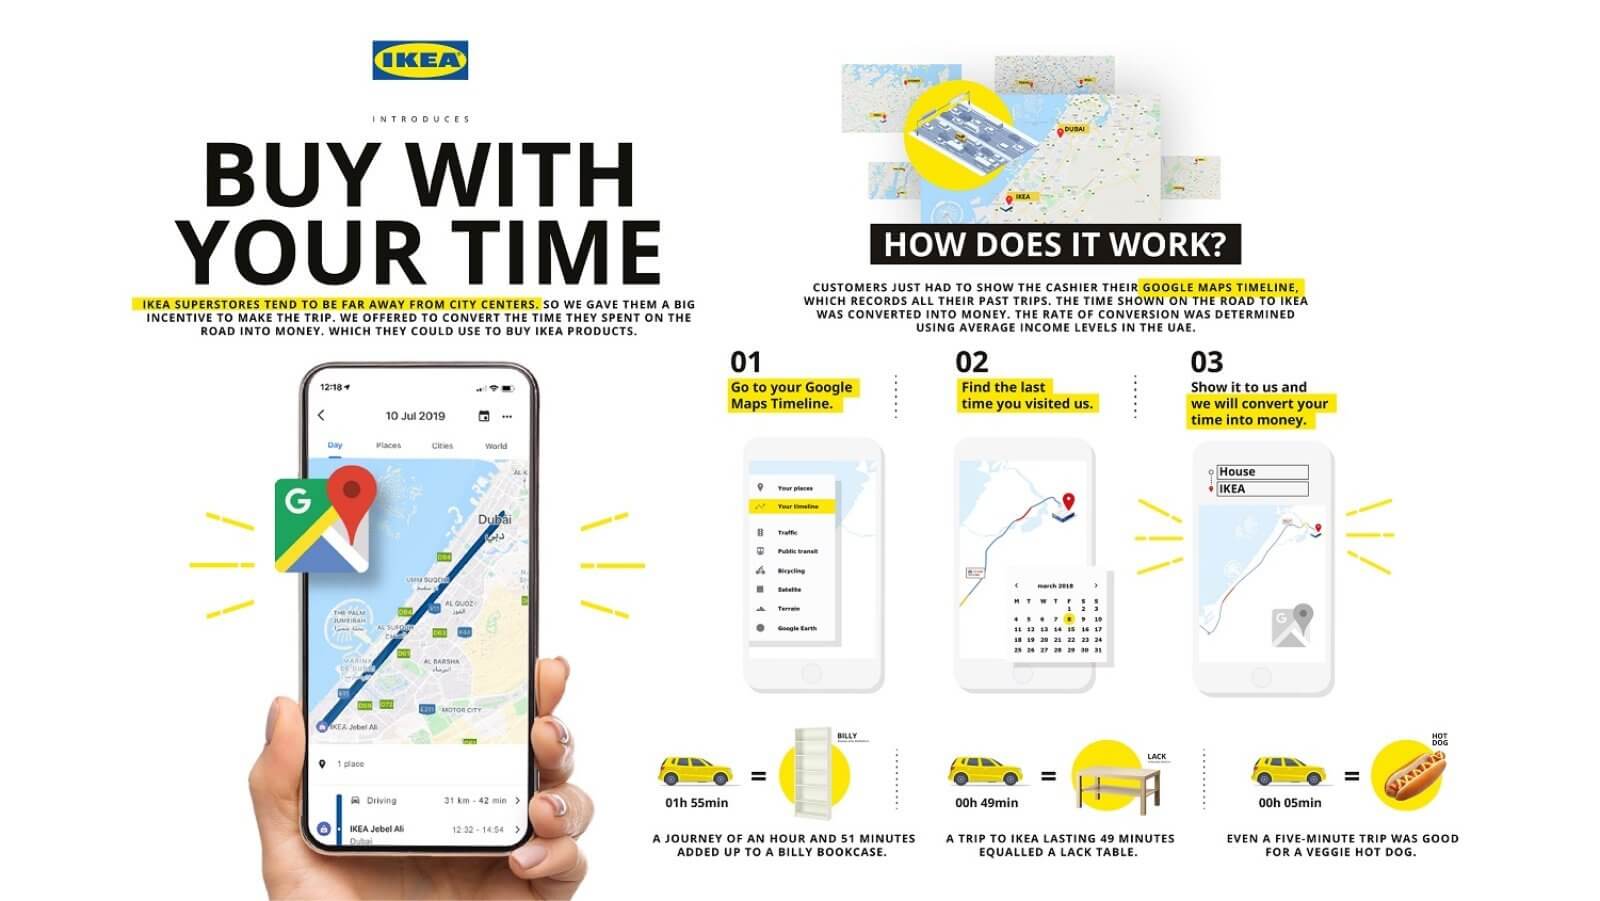 IKEA 杜拜 BUY WITH YOUR TIME 活動